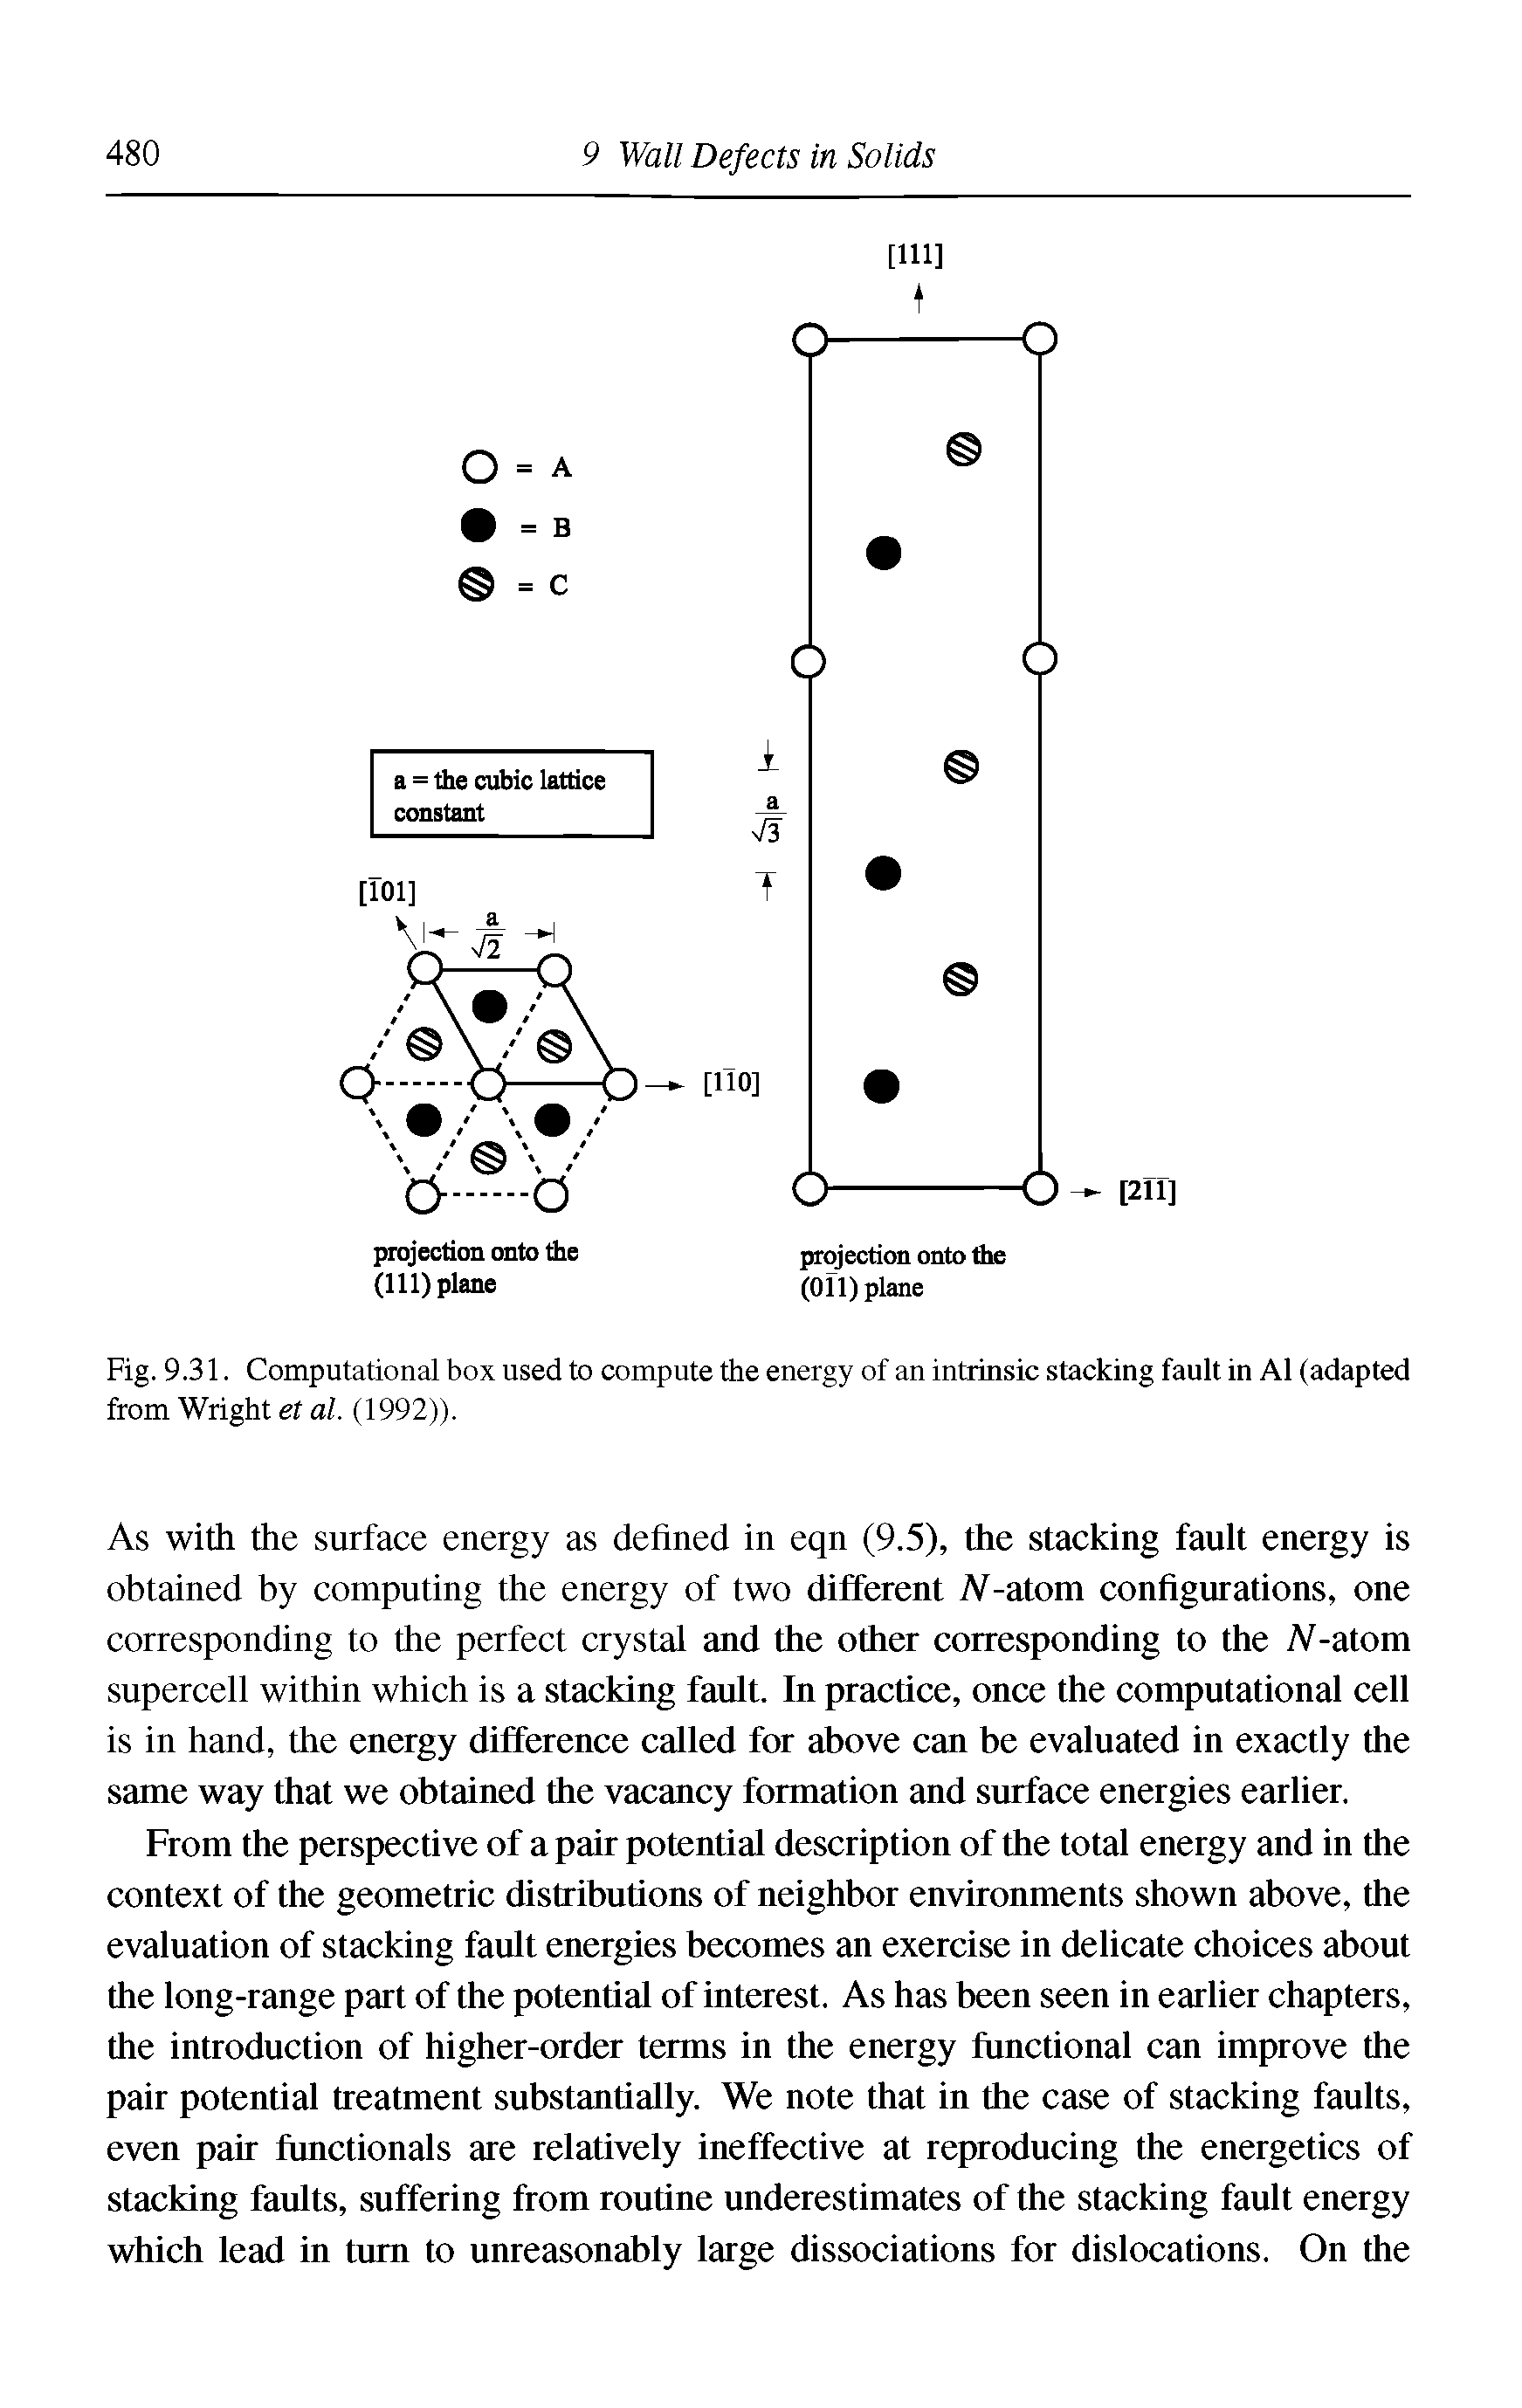 Fig. 9.31. Computational box used to compute the energy of an intrinsic stacking fault in A1 (adapted from Wright et al. (1992)).